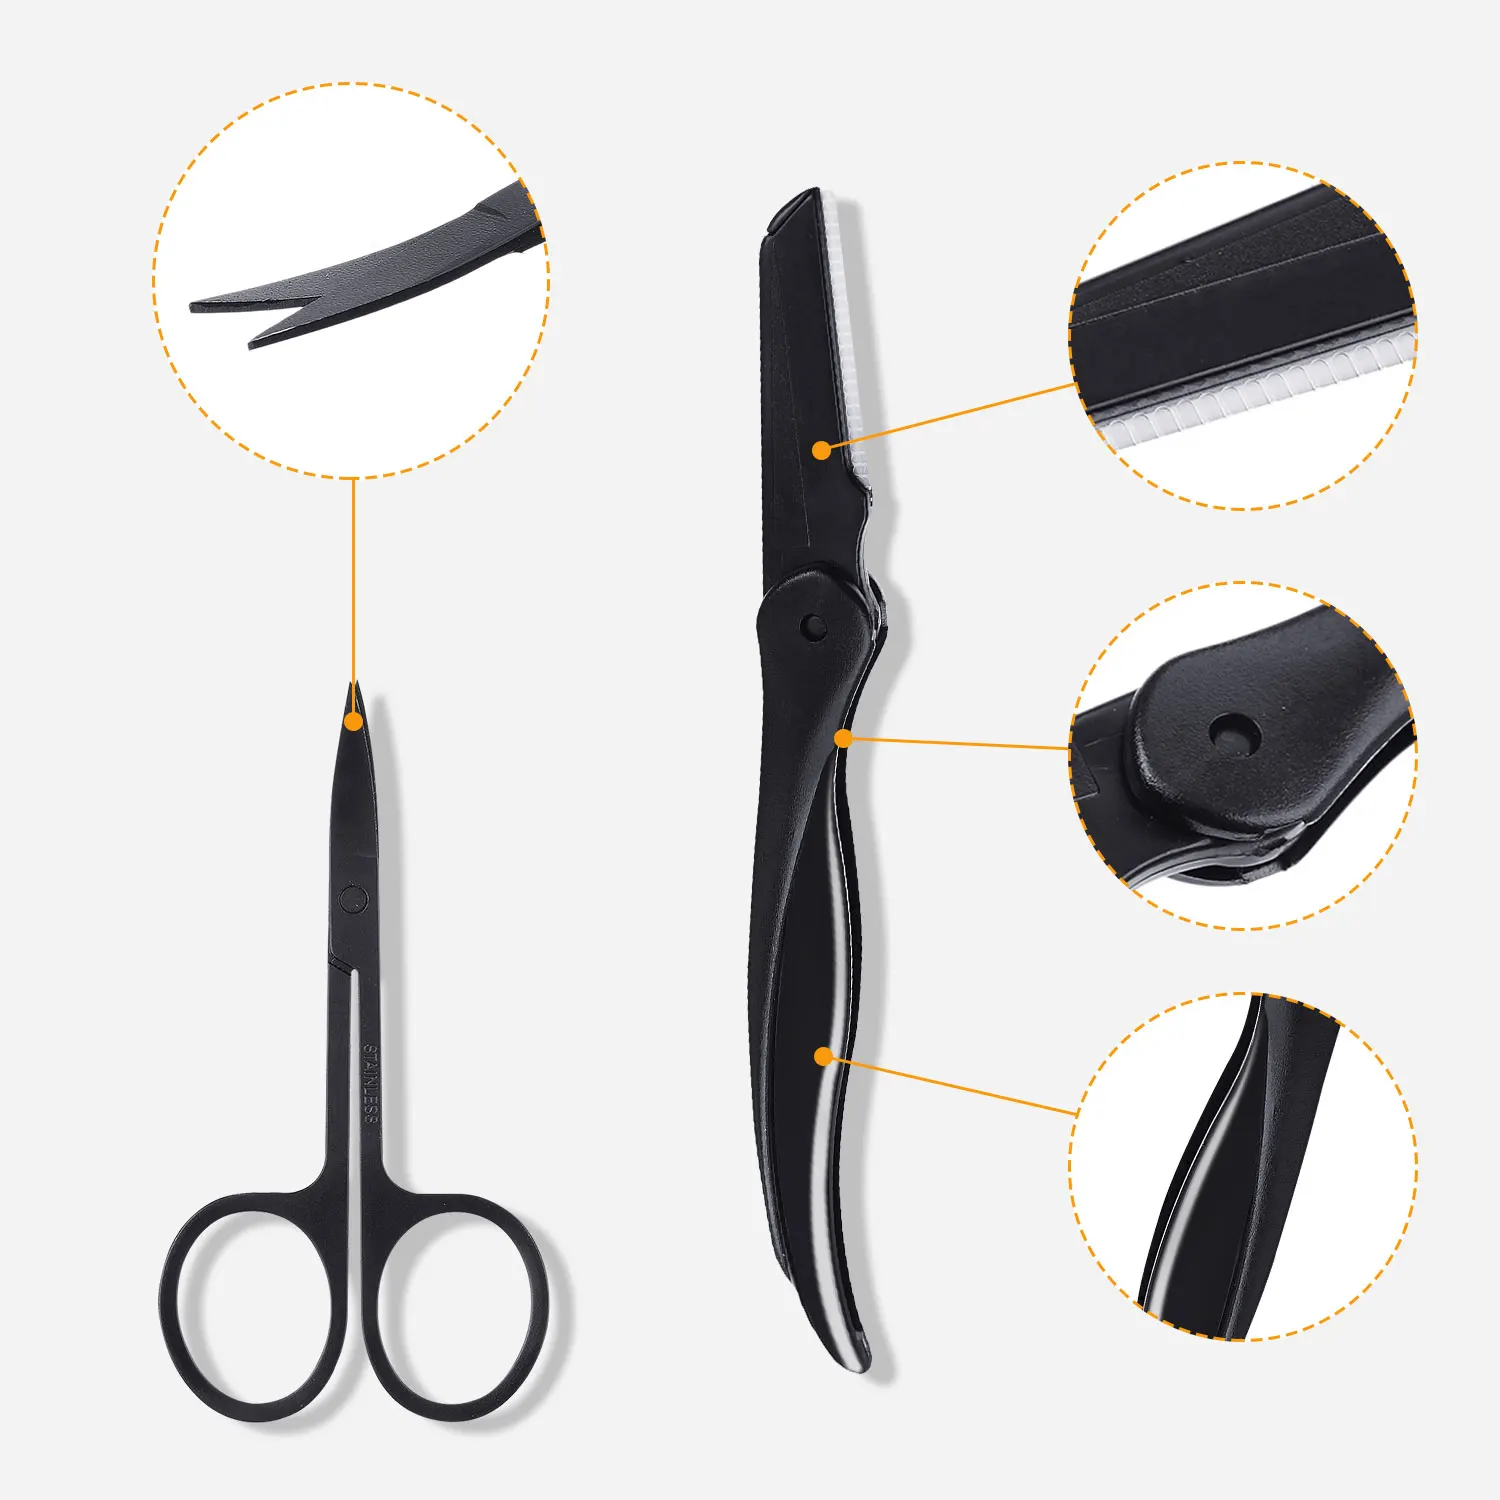 

8 in 1 man Eyebrow Trimming Kit with Case Portable Tweezer and Scissor Set for Eyebrow Grooming Eyebrow Care Kit for Men Women